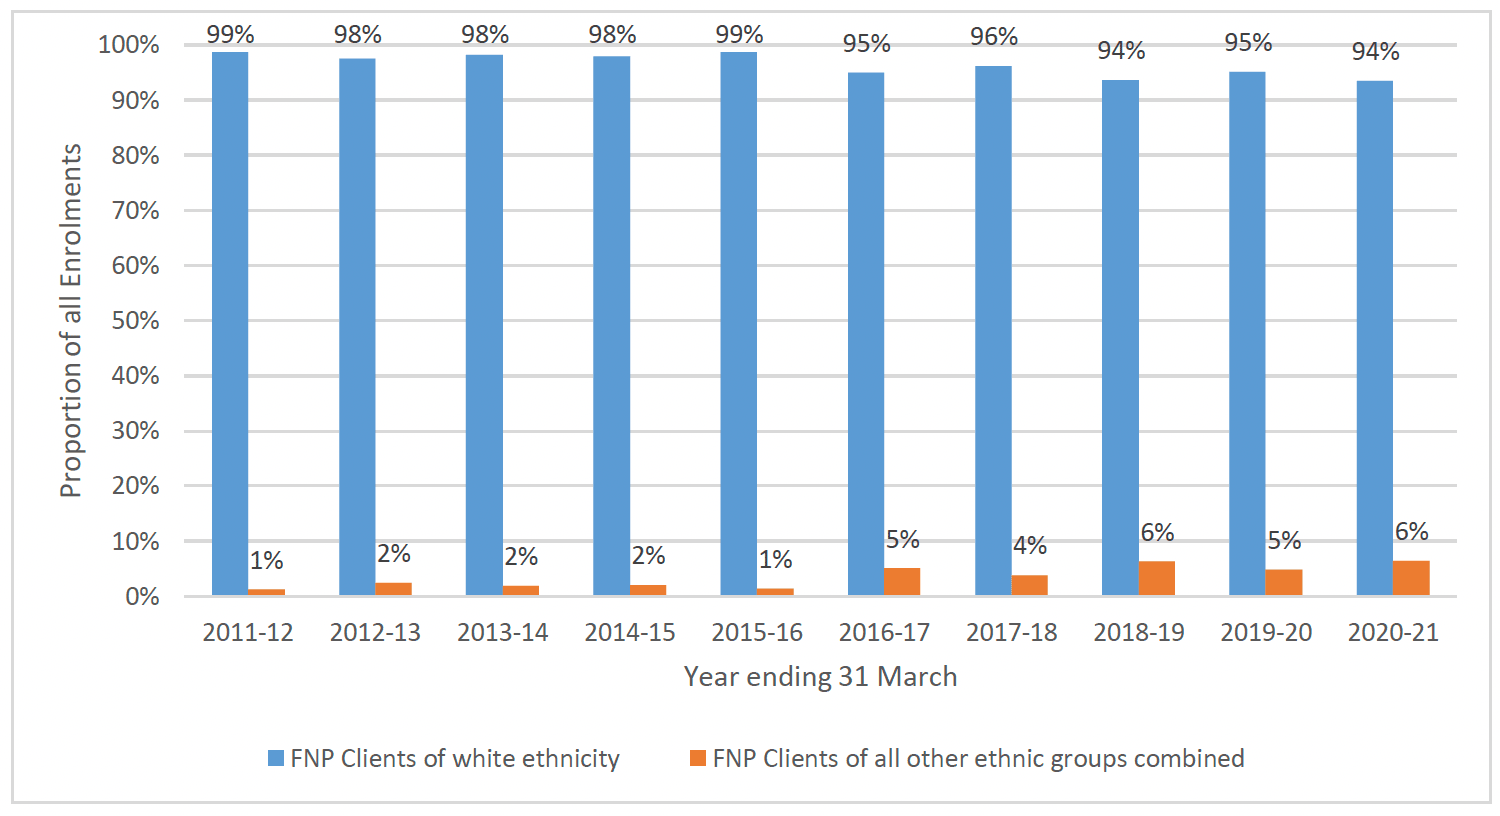 Chart 9 is a bar chart showing the proportion of FNP clients who were of white and all other ethnic groups combined between 2011-12 and 2020-21. The proportion of FNP clients from all other ethnic groups combined has increased from 1% to 6%.